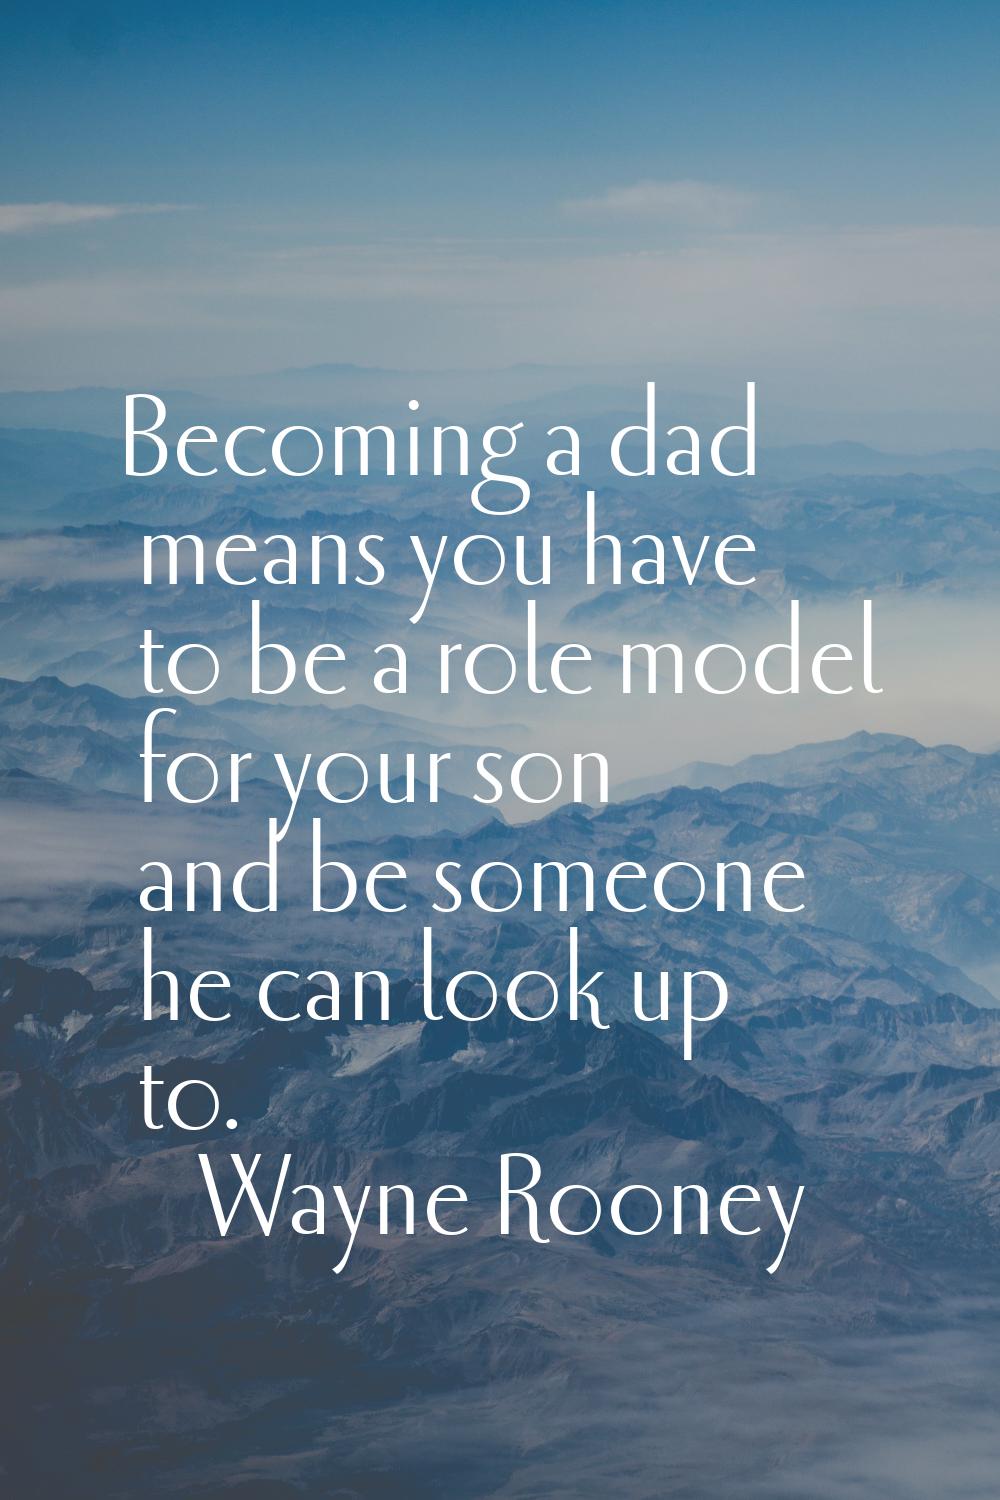 Becoming a dad means you have to be a role model for your son and be someone he can look up to.